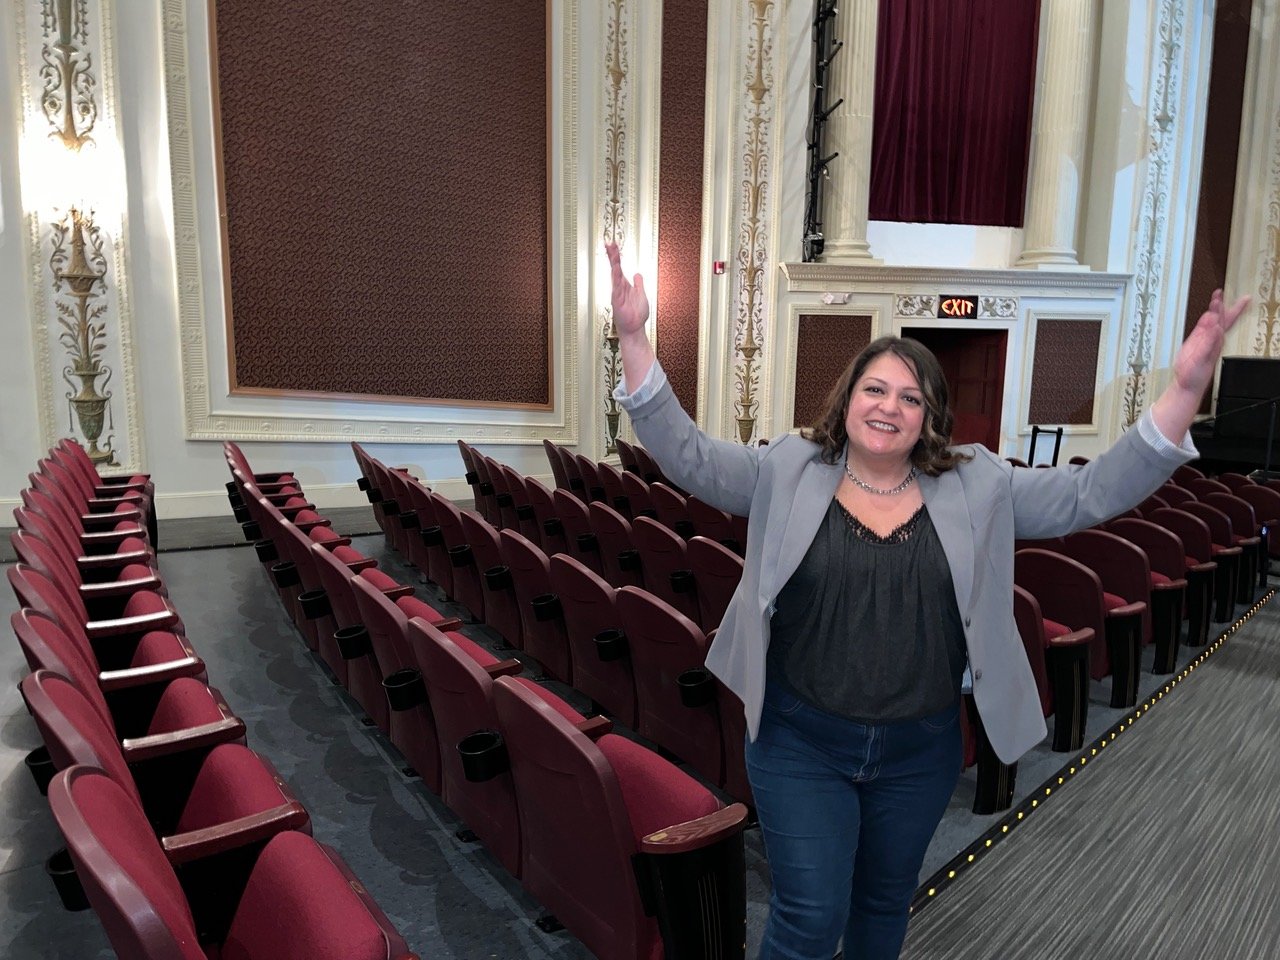 Patchogue Theatre for the Performing Arts associate director Jodi Giambrone invites patrons to return to the theatre with their February shows and beyond.